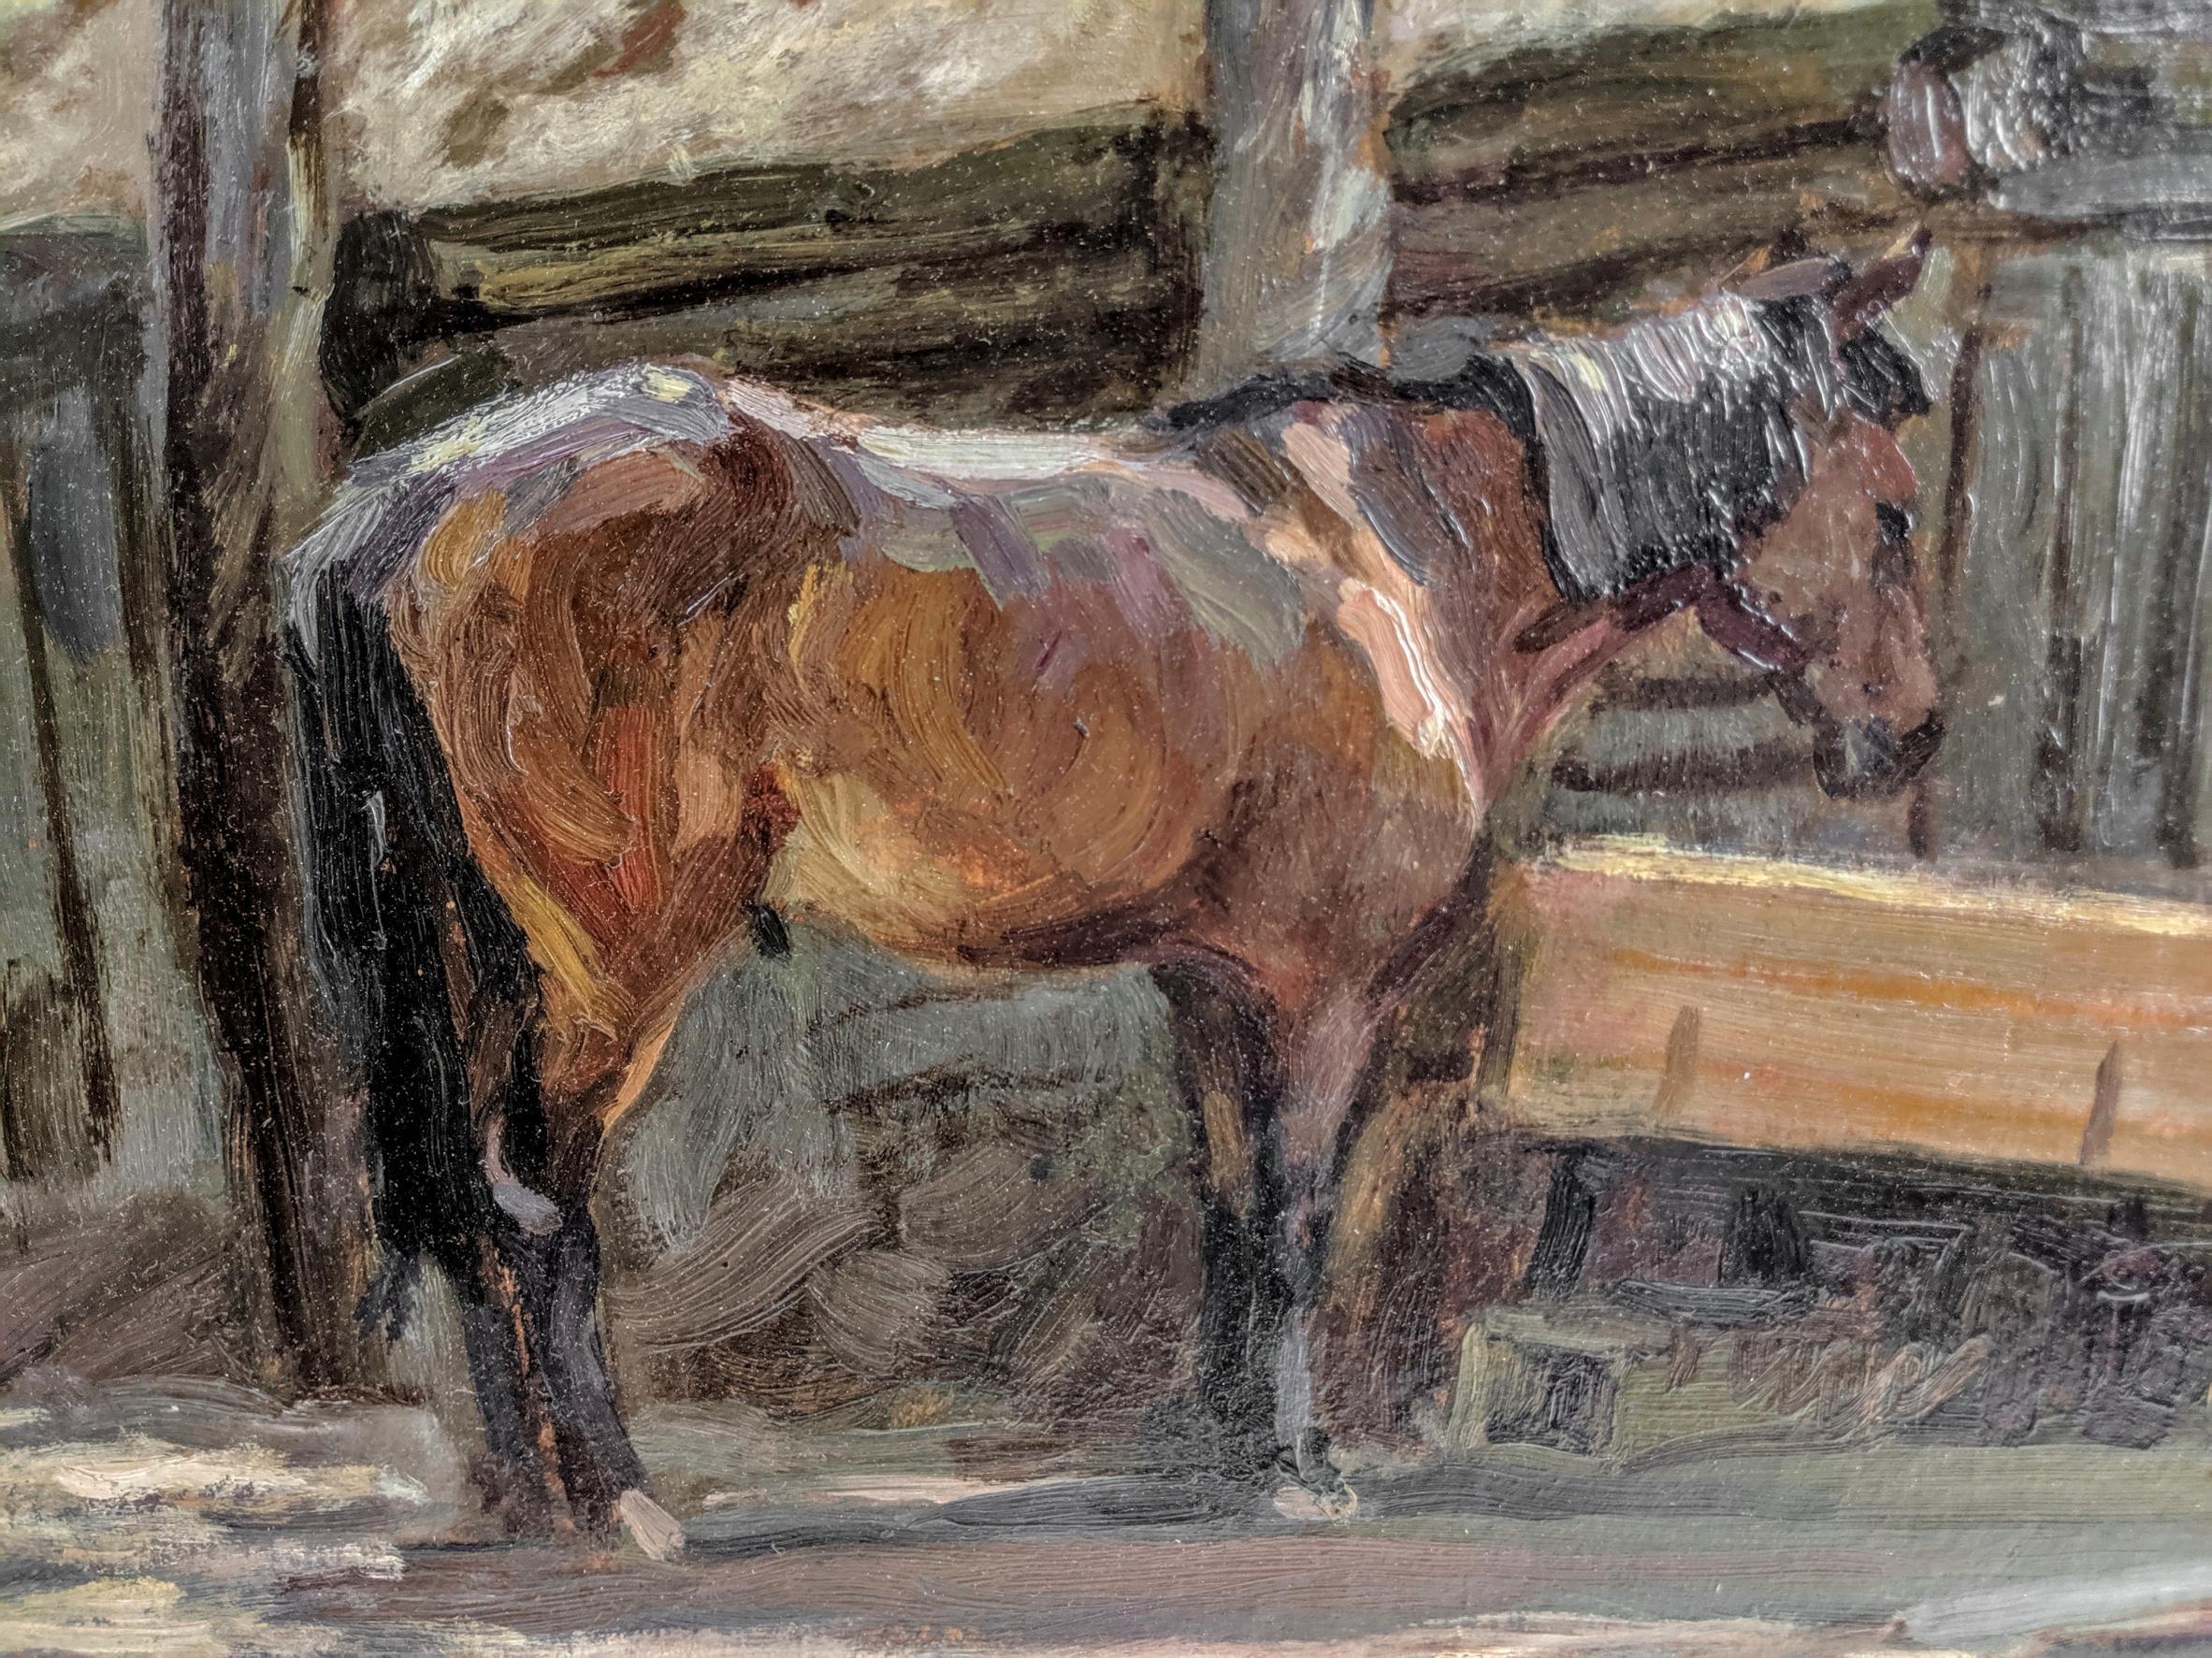 Oil painting on board, horse feeding, after Sir Alfred Munnings (British, 1878-1959), circa 1940.
In excellent antique condition and ready to hang. 

Frame size: 16.5